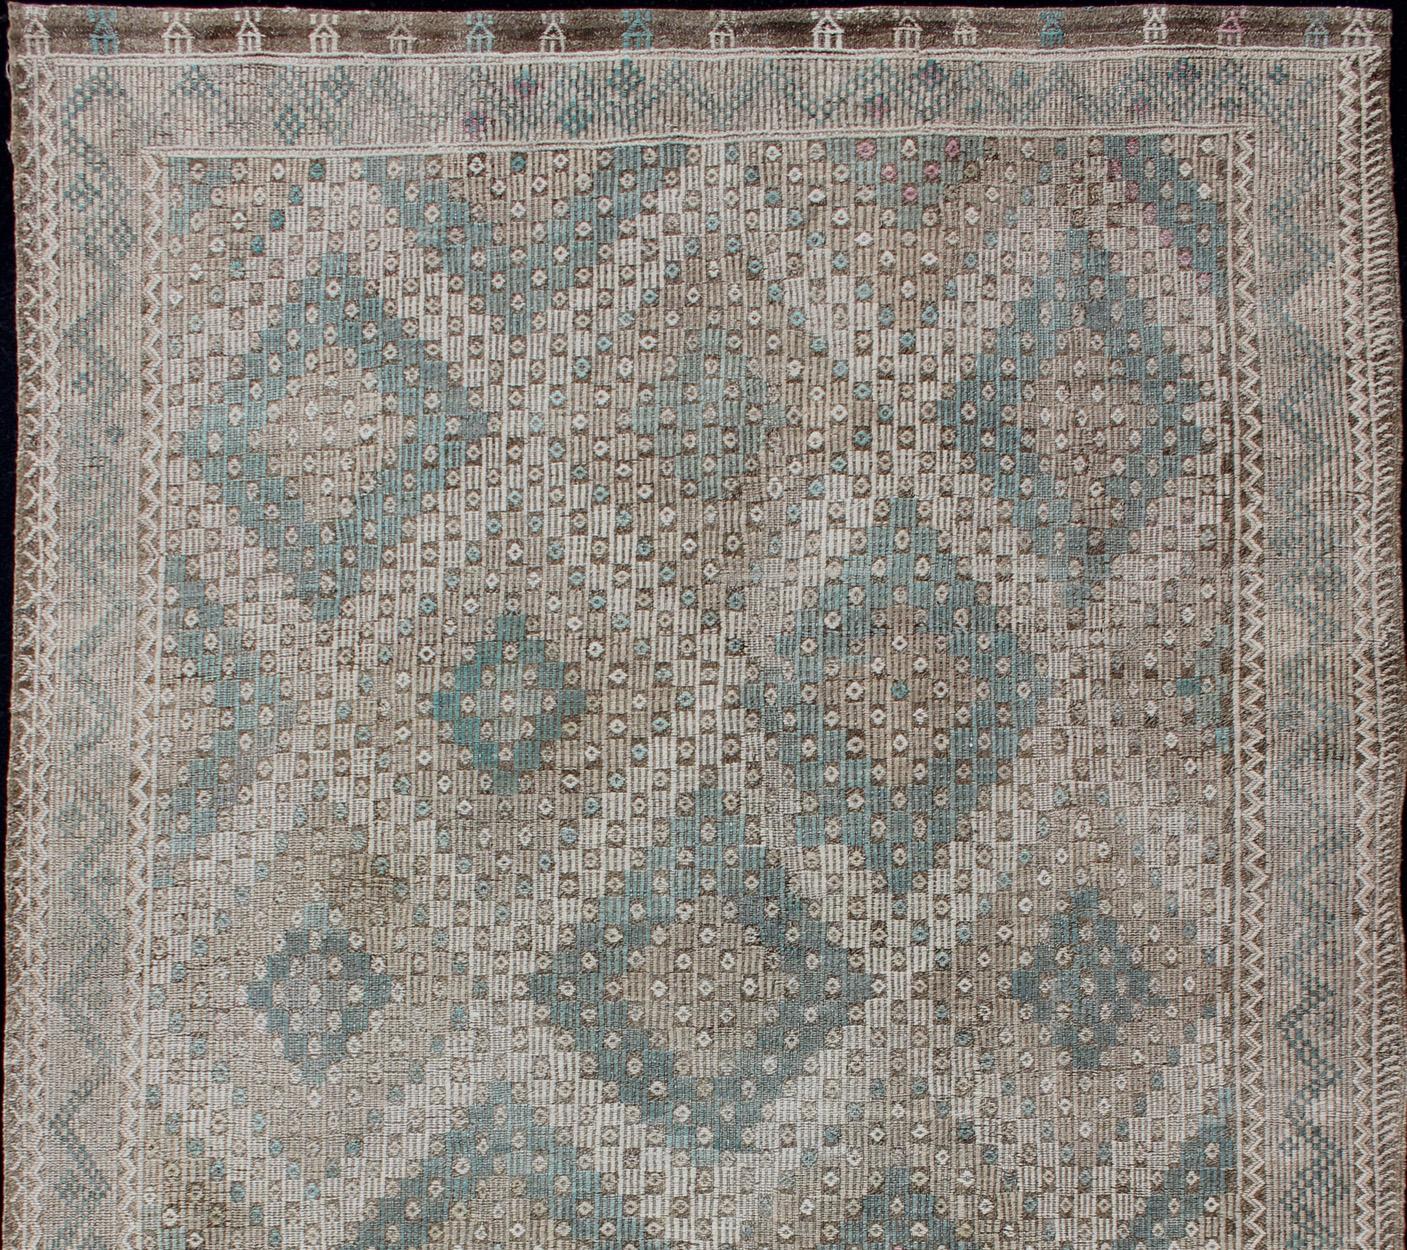 Turkish vintage Embroidered flat woven carpet, rug EN-179404, country of origin / type: Turkey / Oushak, circa 1940

This Embroidered kilim rug from Turkey features an all-over layered diamond and geometric design rendered in natural tones and